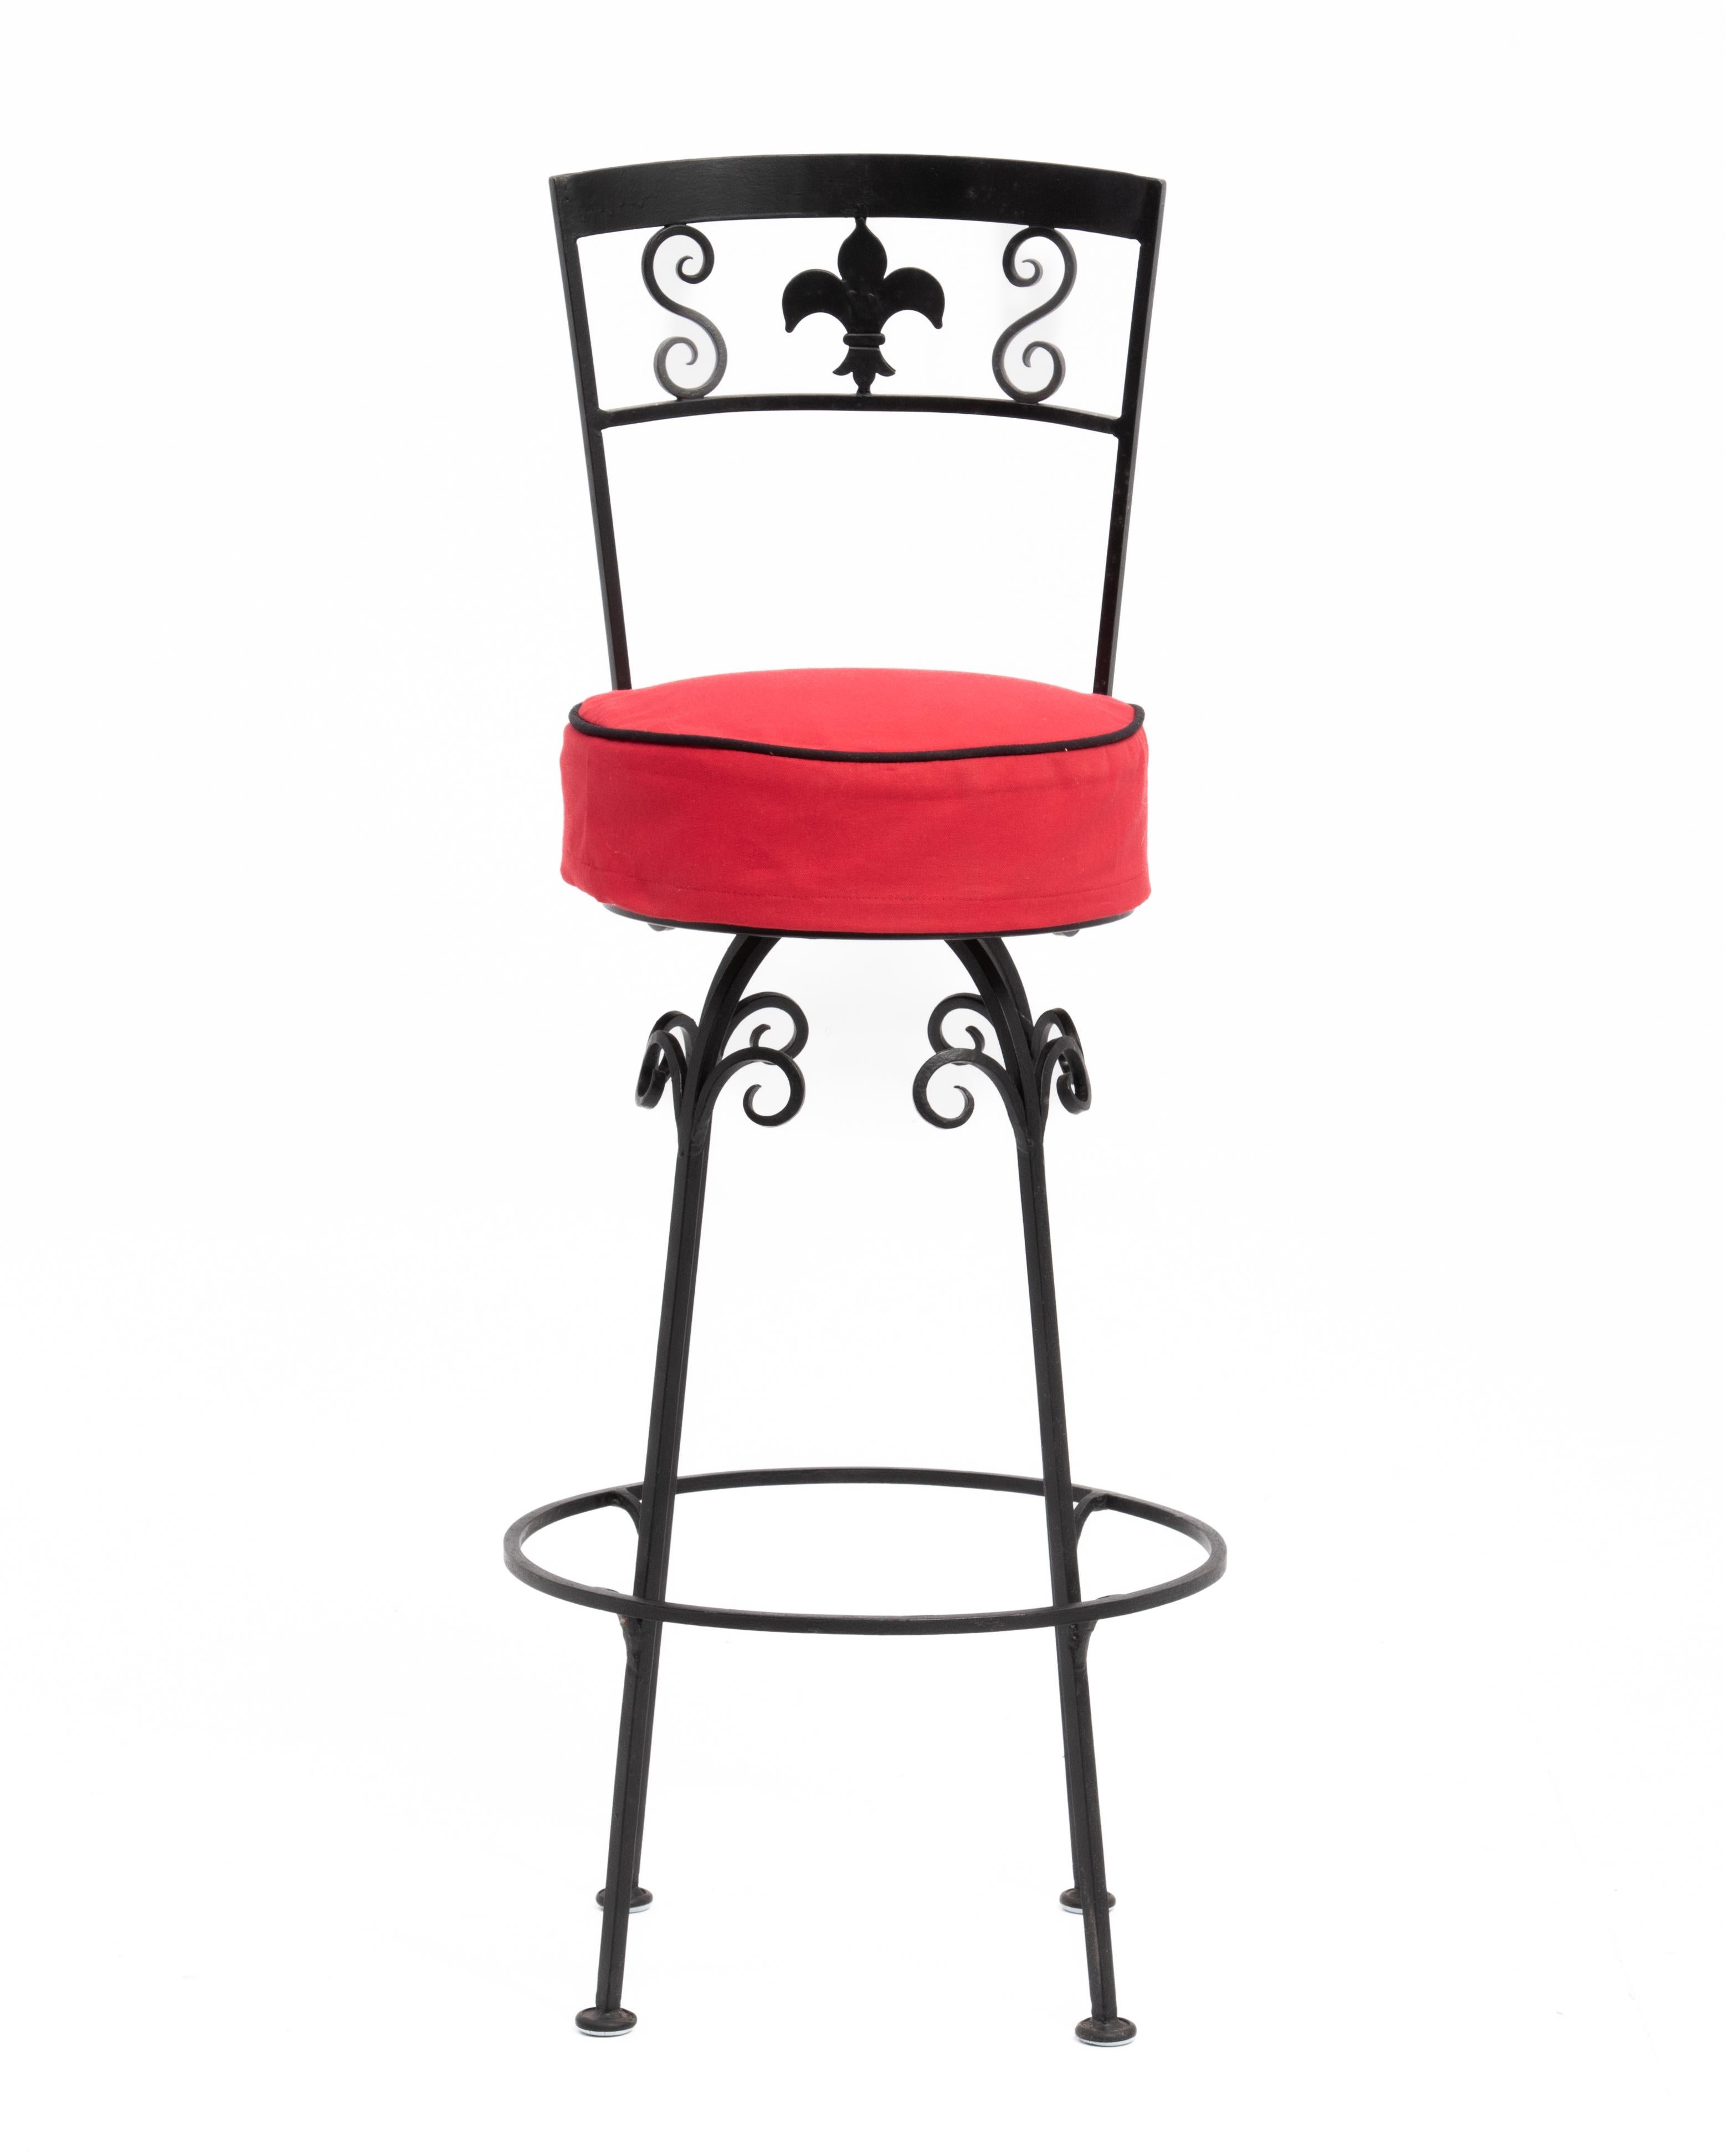 A stylish set of four wrought iron barstools with flour-de-lis decoration. Custom made in America for a New York City Restaurant in the 1960s. The red fabric on the seats are slipcovers.
We have eight of these barstools, two sets of four...